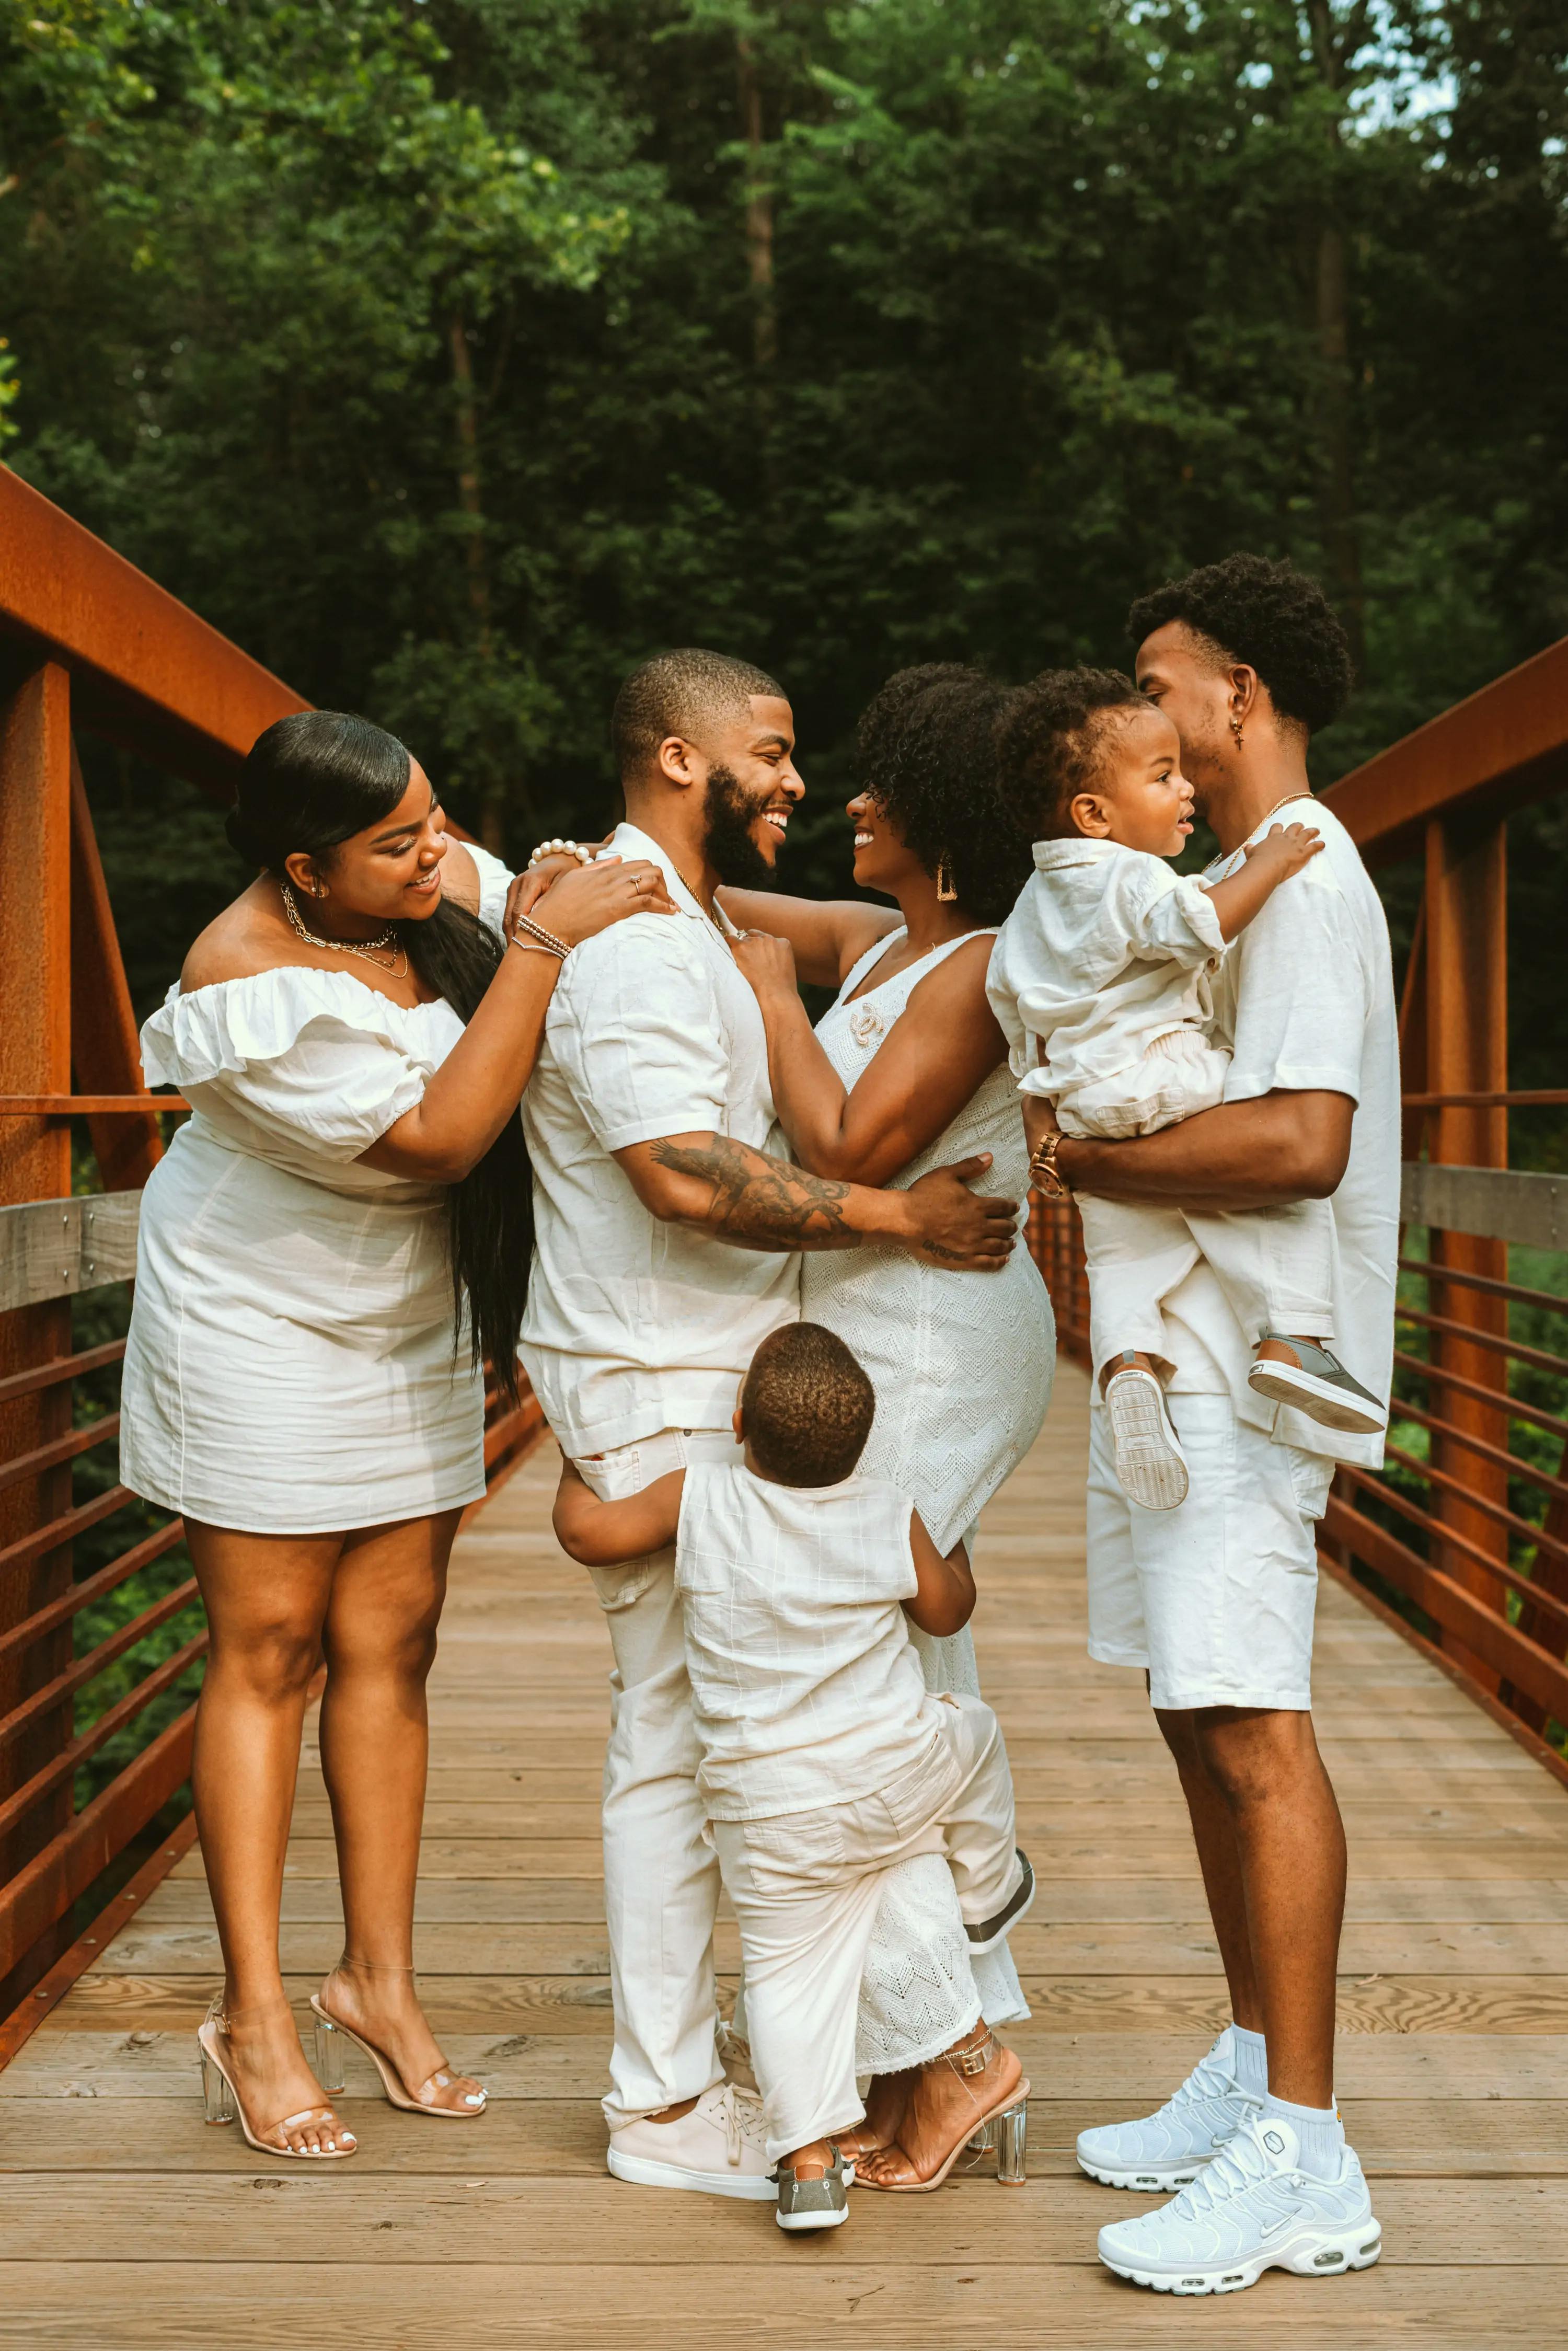 Black mother and father smiling at each other in the middle of a footbridge, with oldest daughter on the left, oldest son on the right, holding their youngest son, and third son hugging their legs.